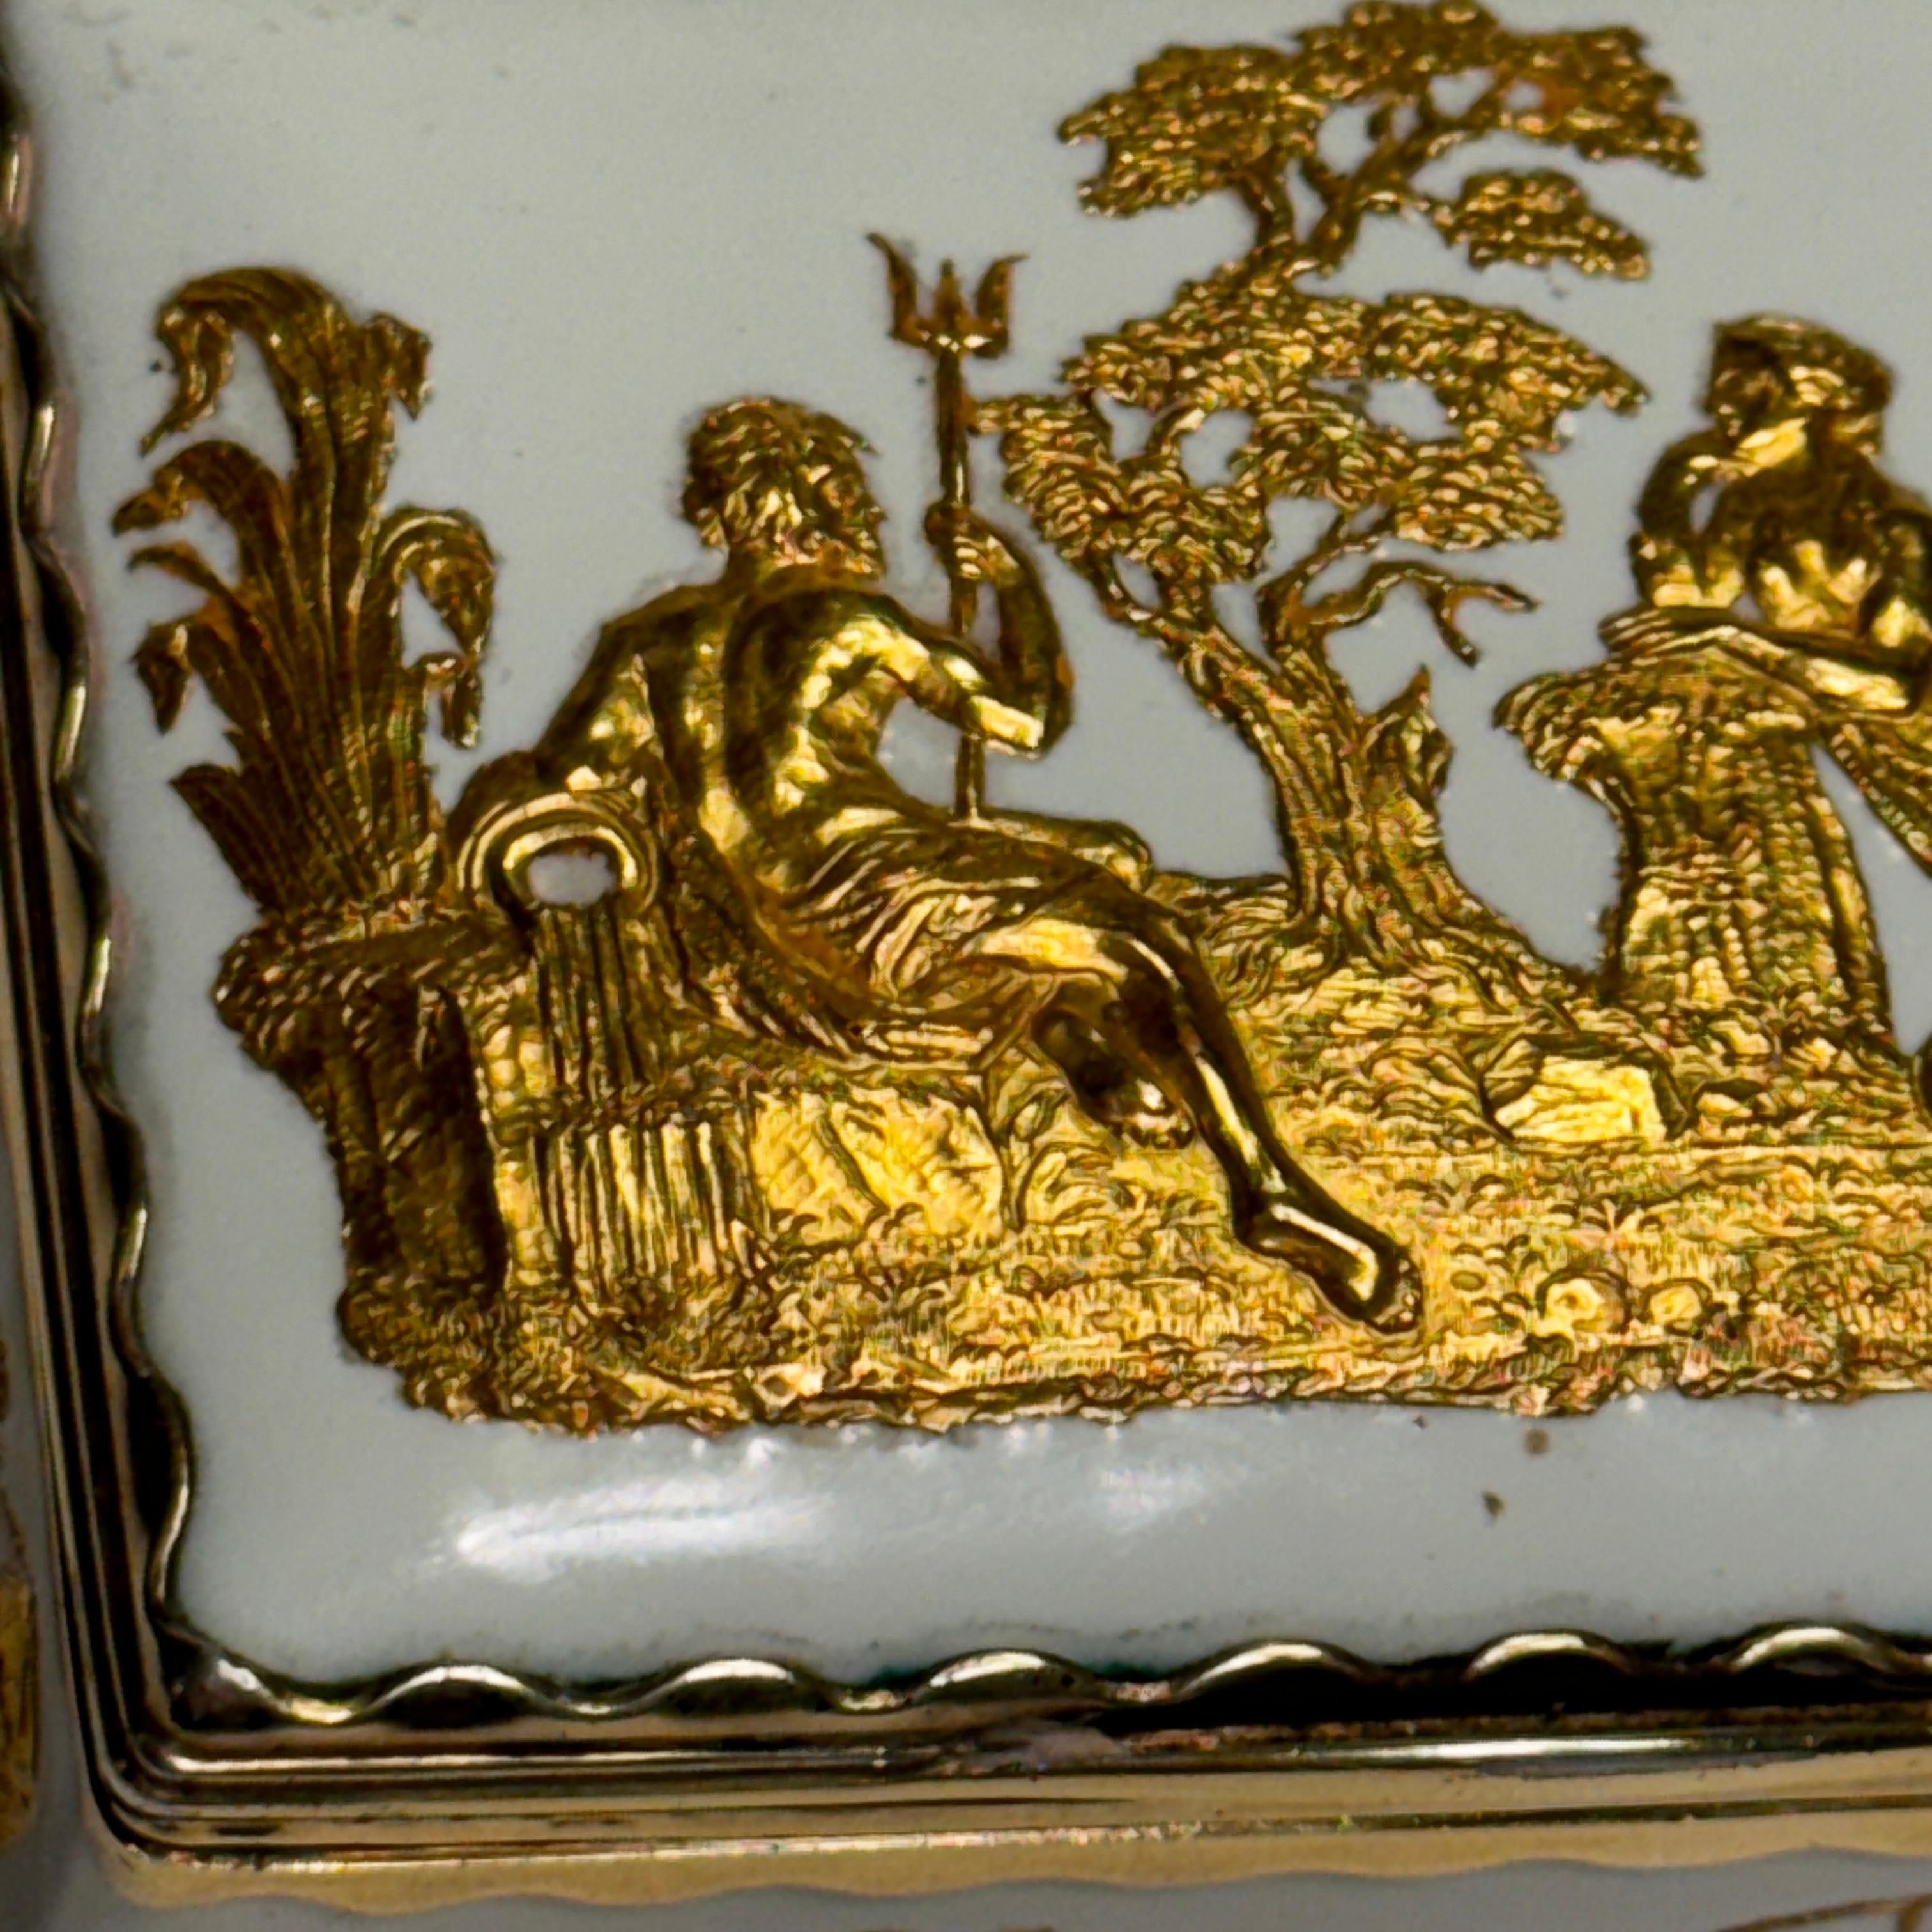 18th Century Porcelain Snuff Tobacco Box with Ormulu Gilt Decorations For Sale 6